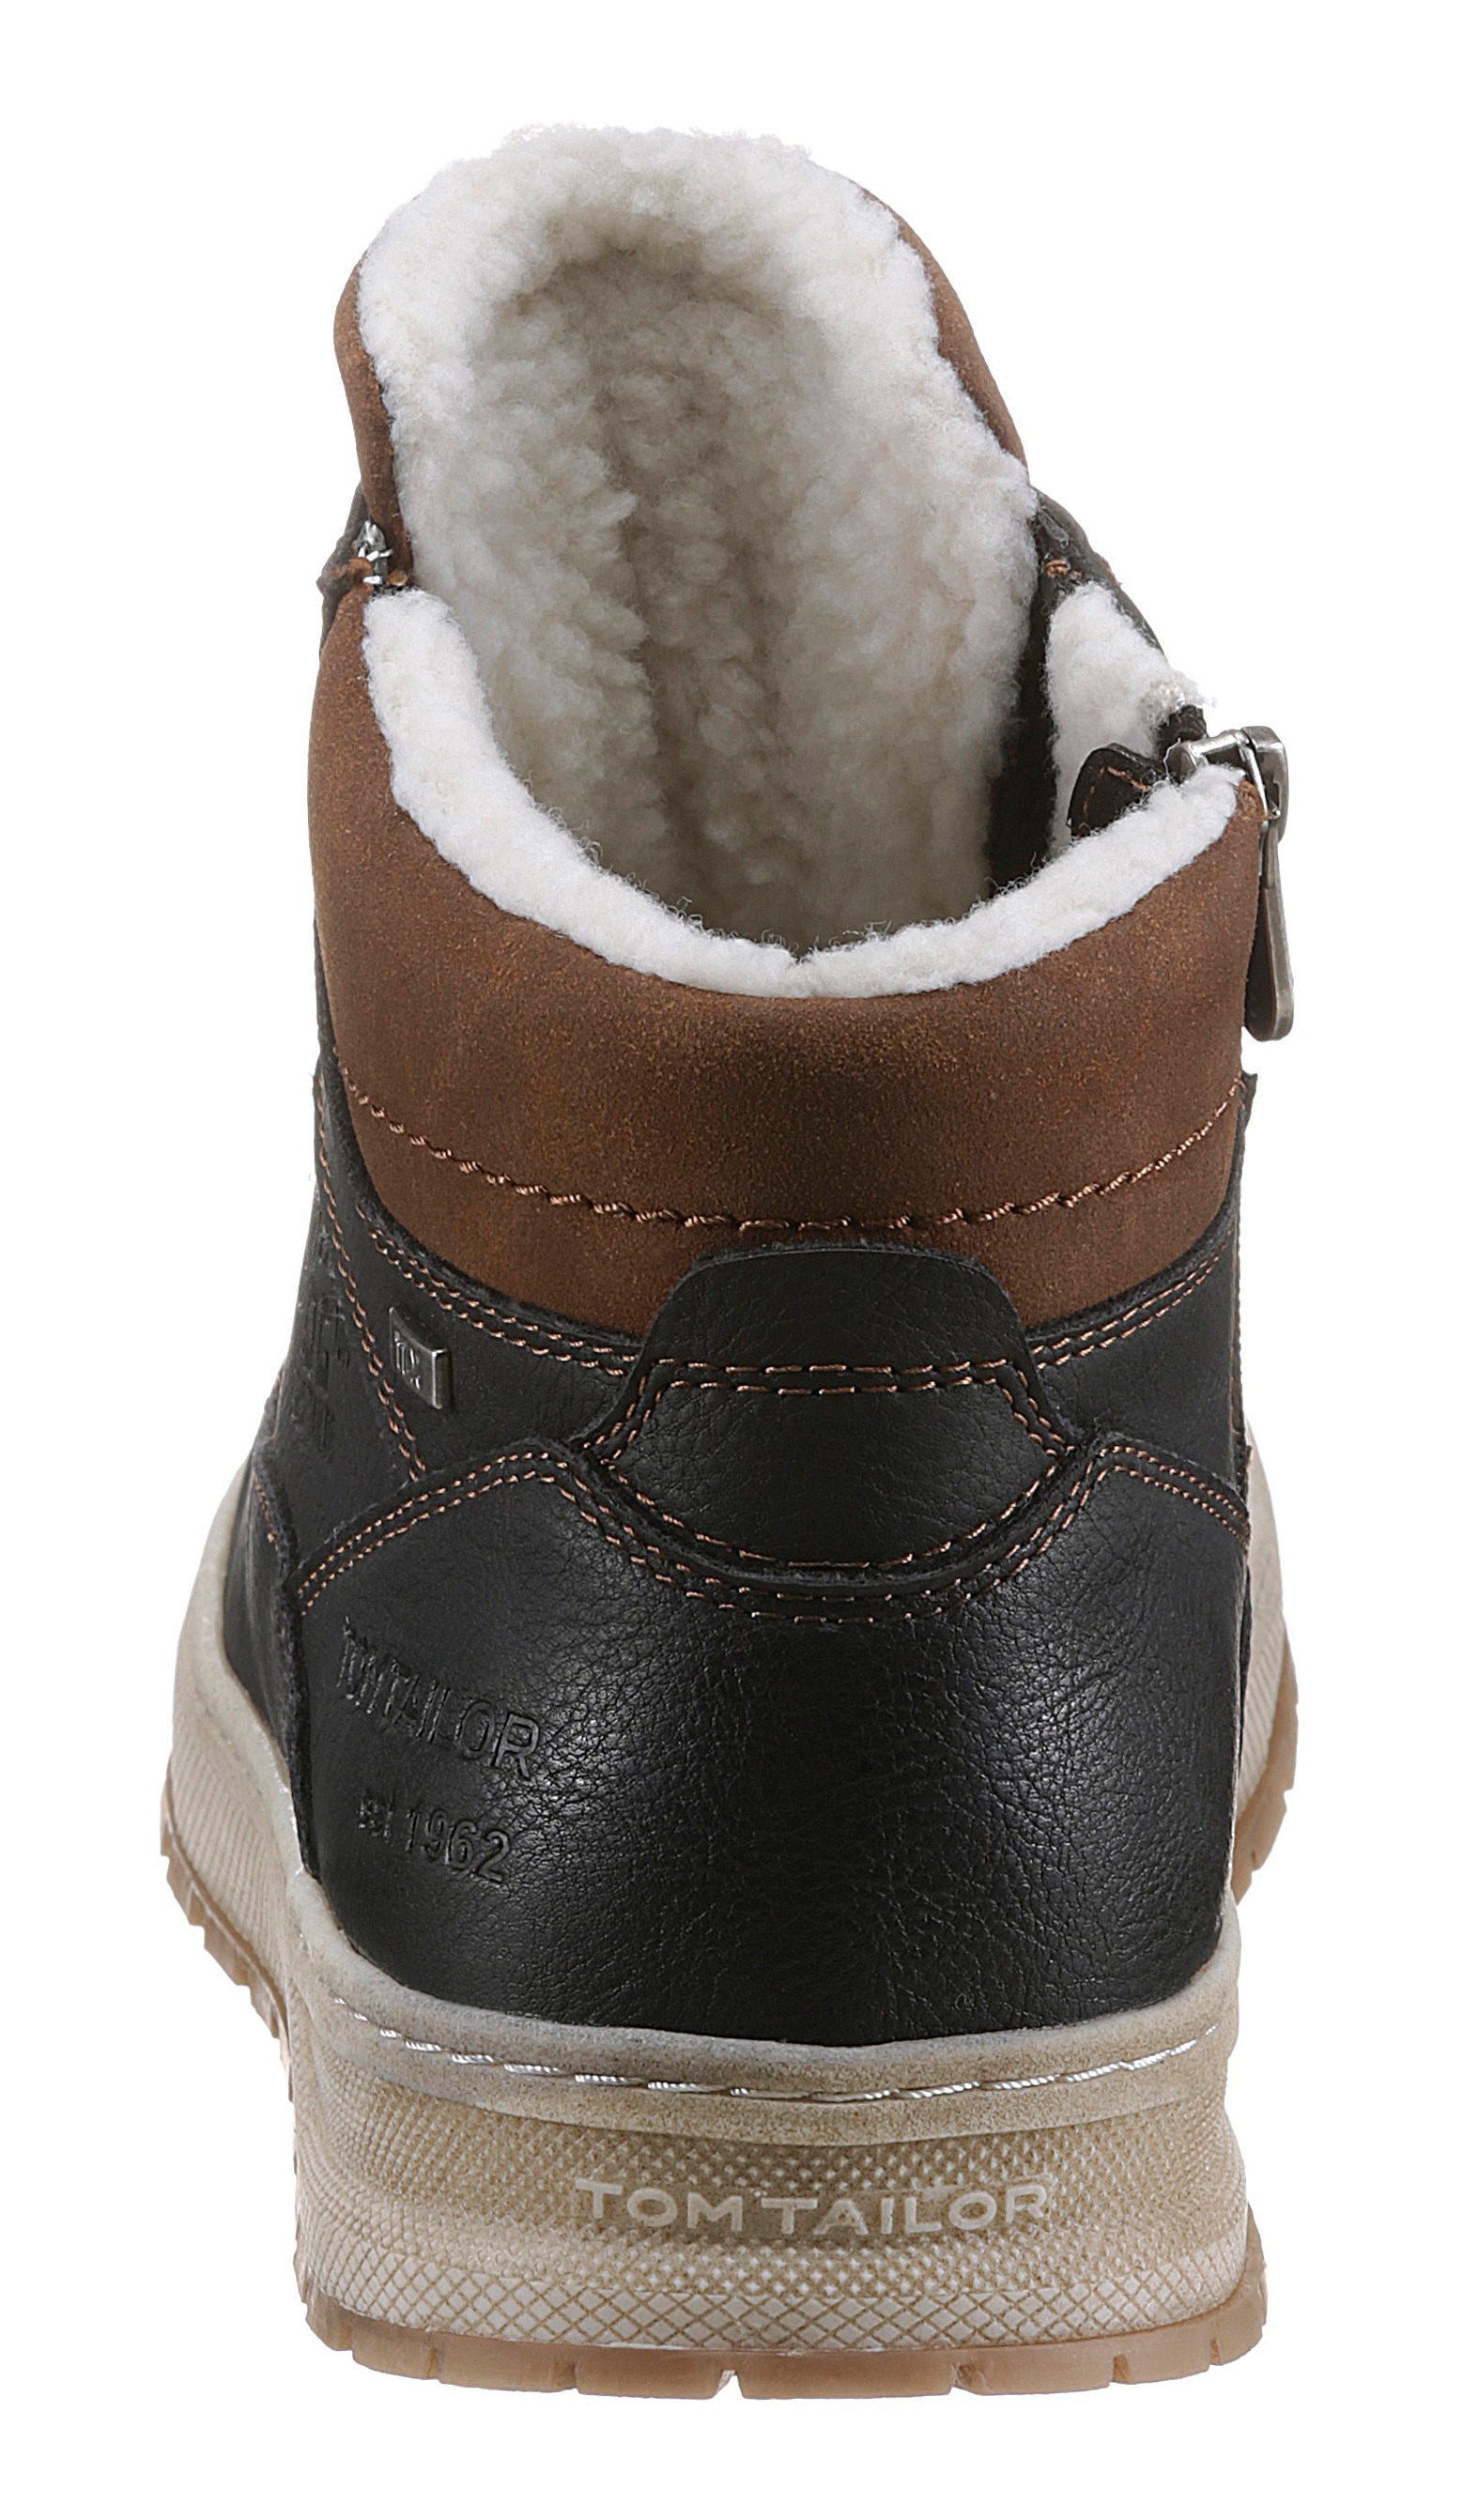 TOM TAILOR Winterboots, mit TEX-Membran, G-Weite shoppen | I\'m walking | Boots